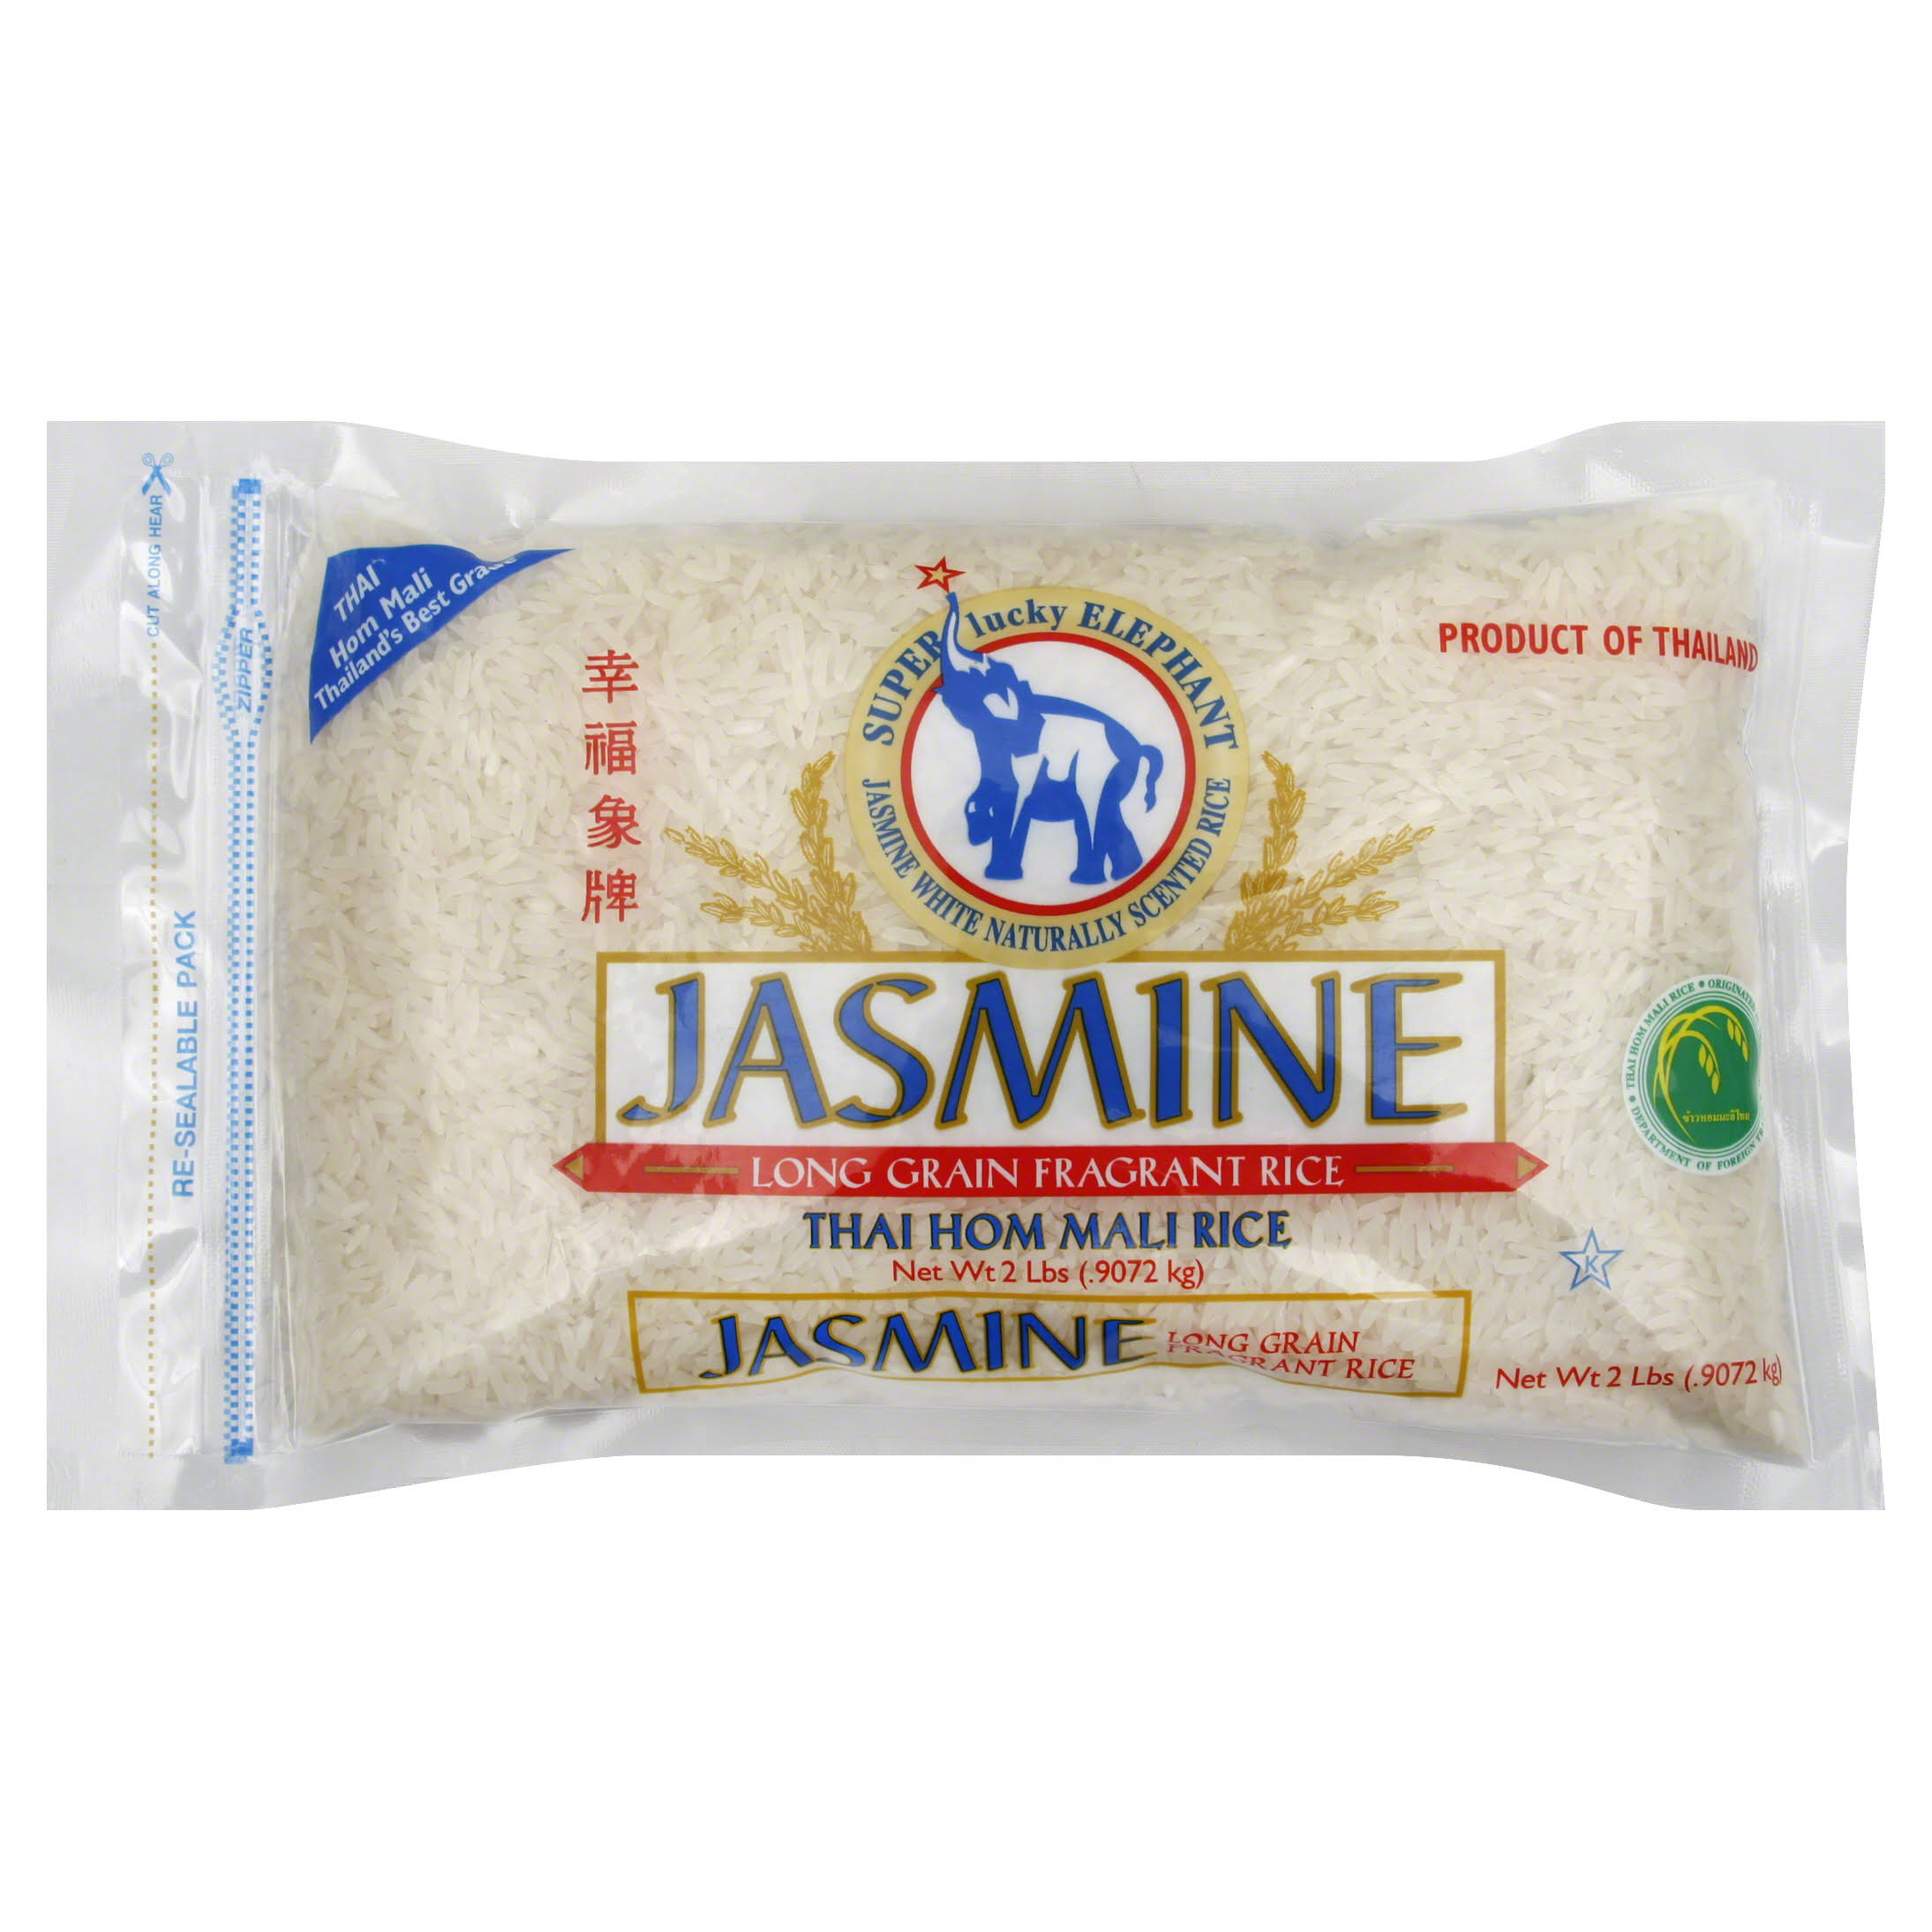 Super Lucky Elephant White Jasmine Rice - Naturally Scented, 2lbs